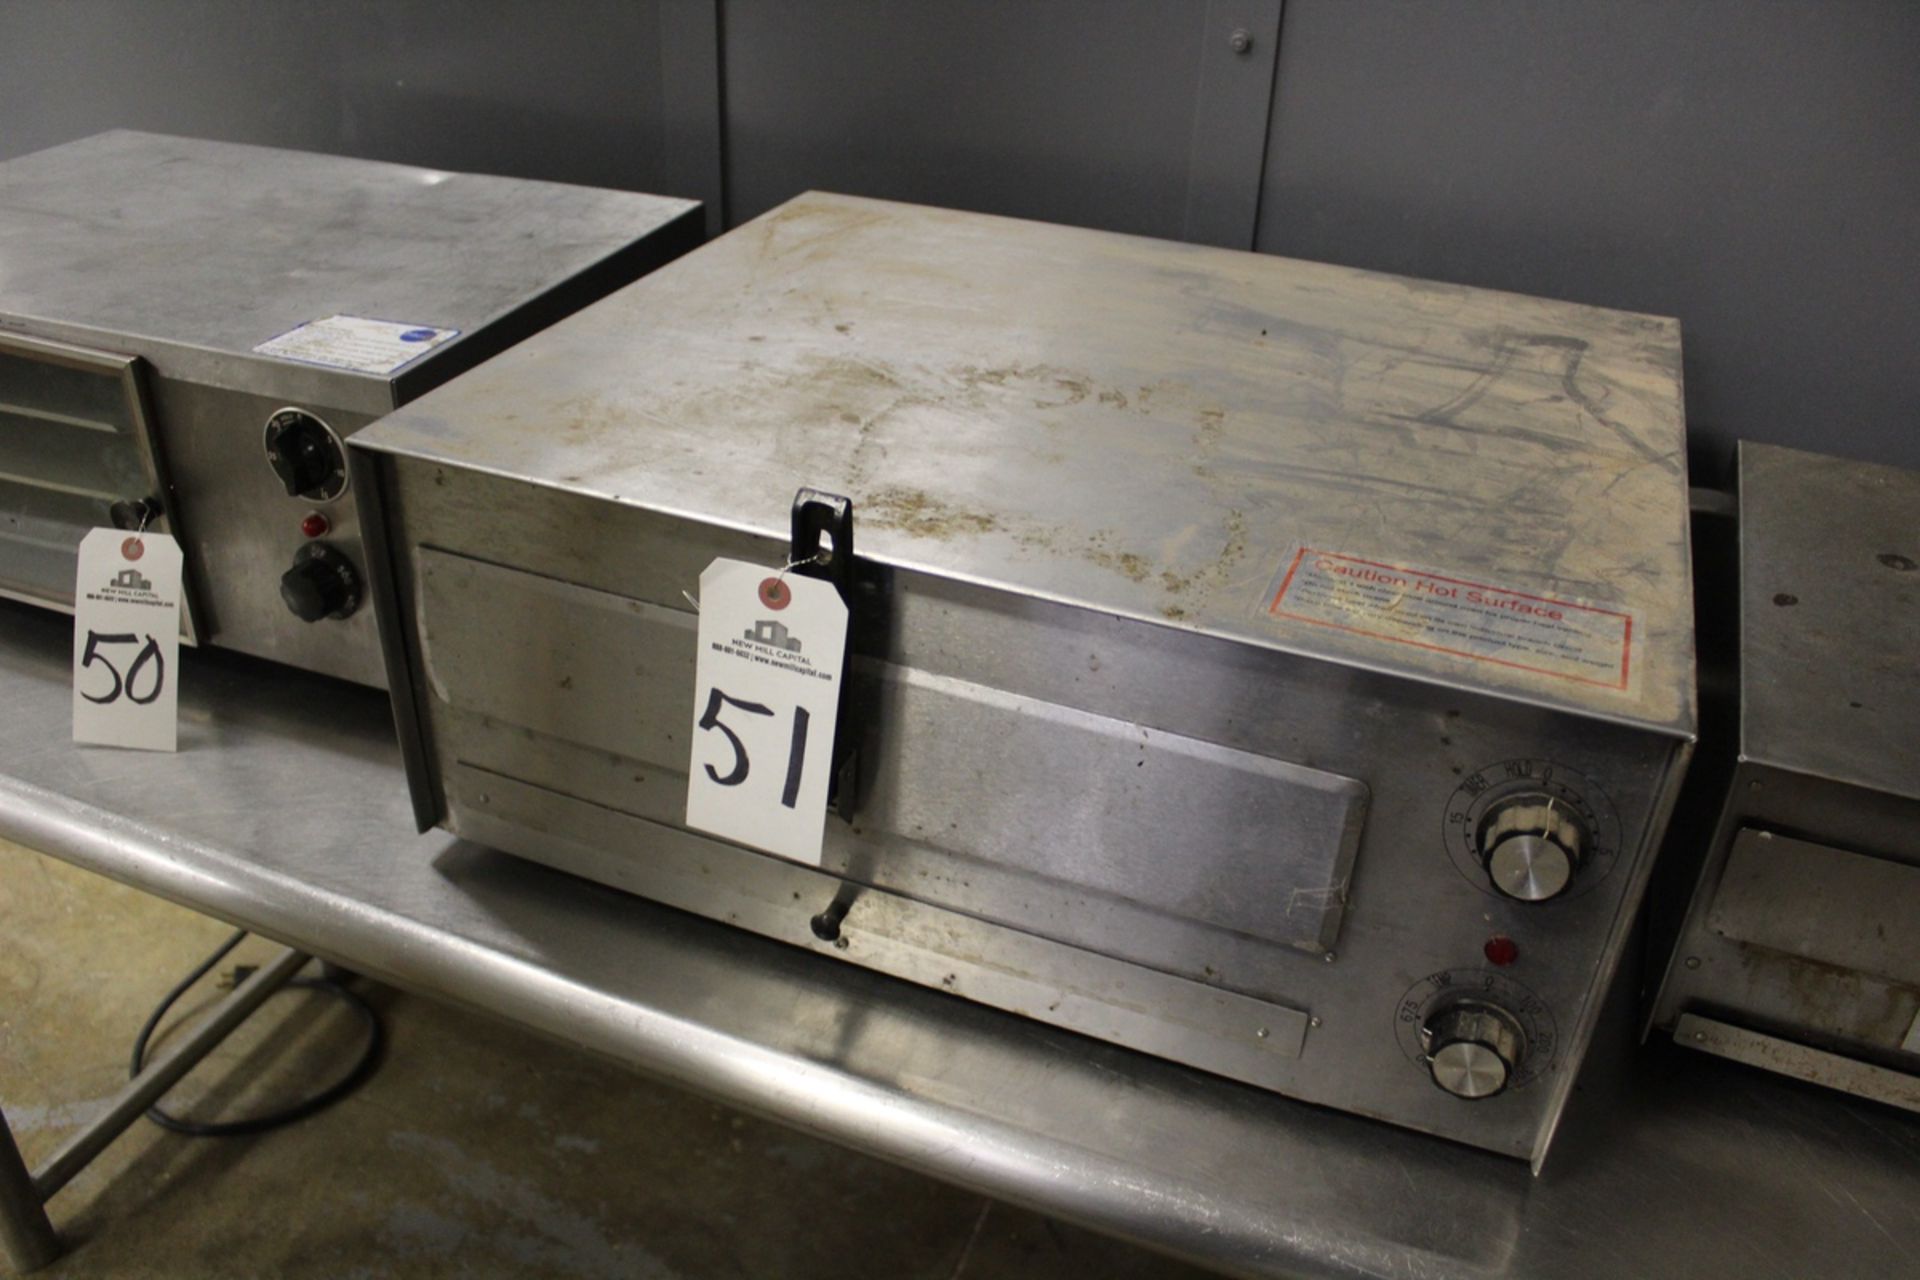 Wisco Bench Top Oven, M# 560B, S/N 02672 | Rig Fee: No Charge